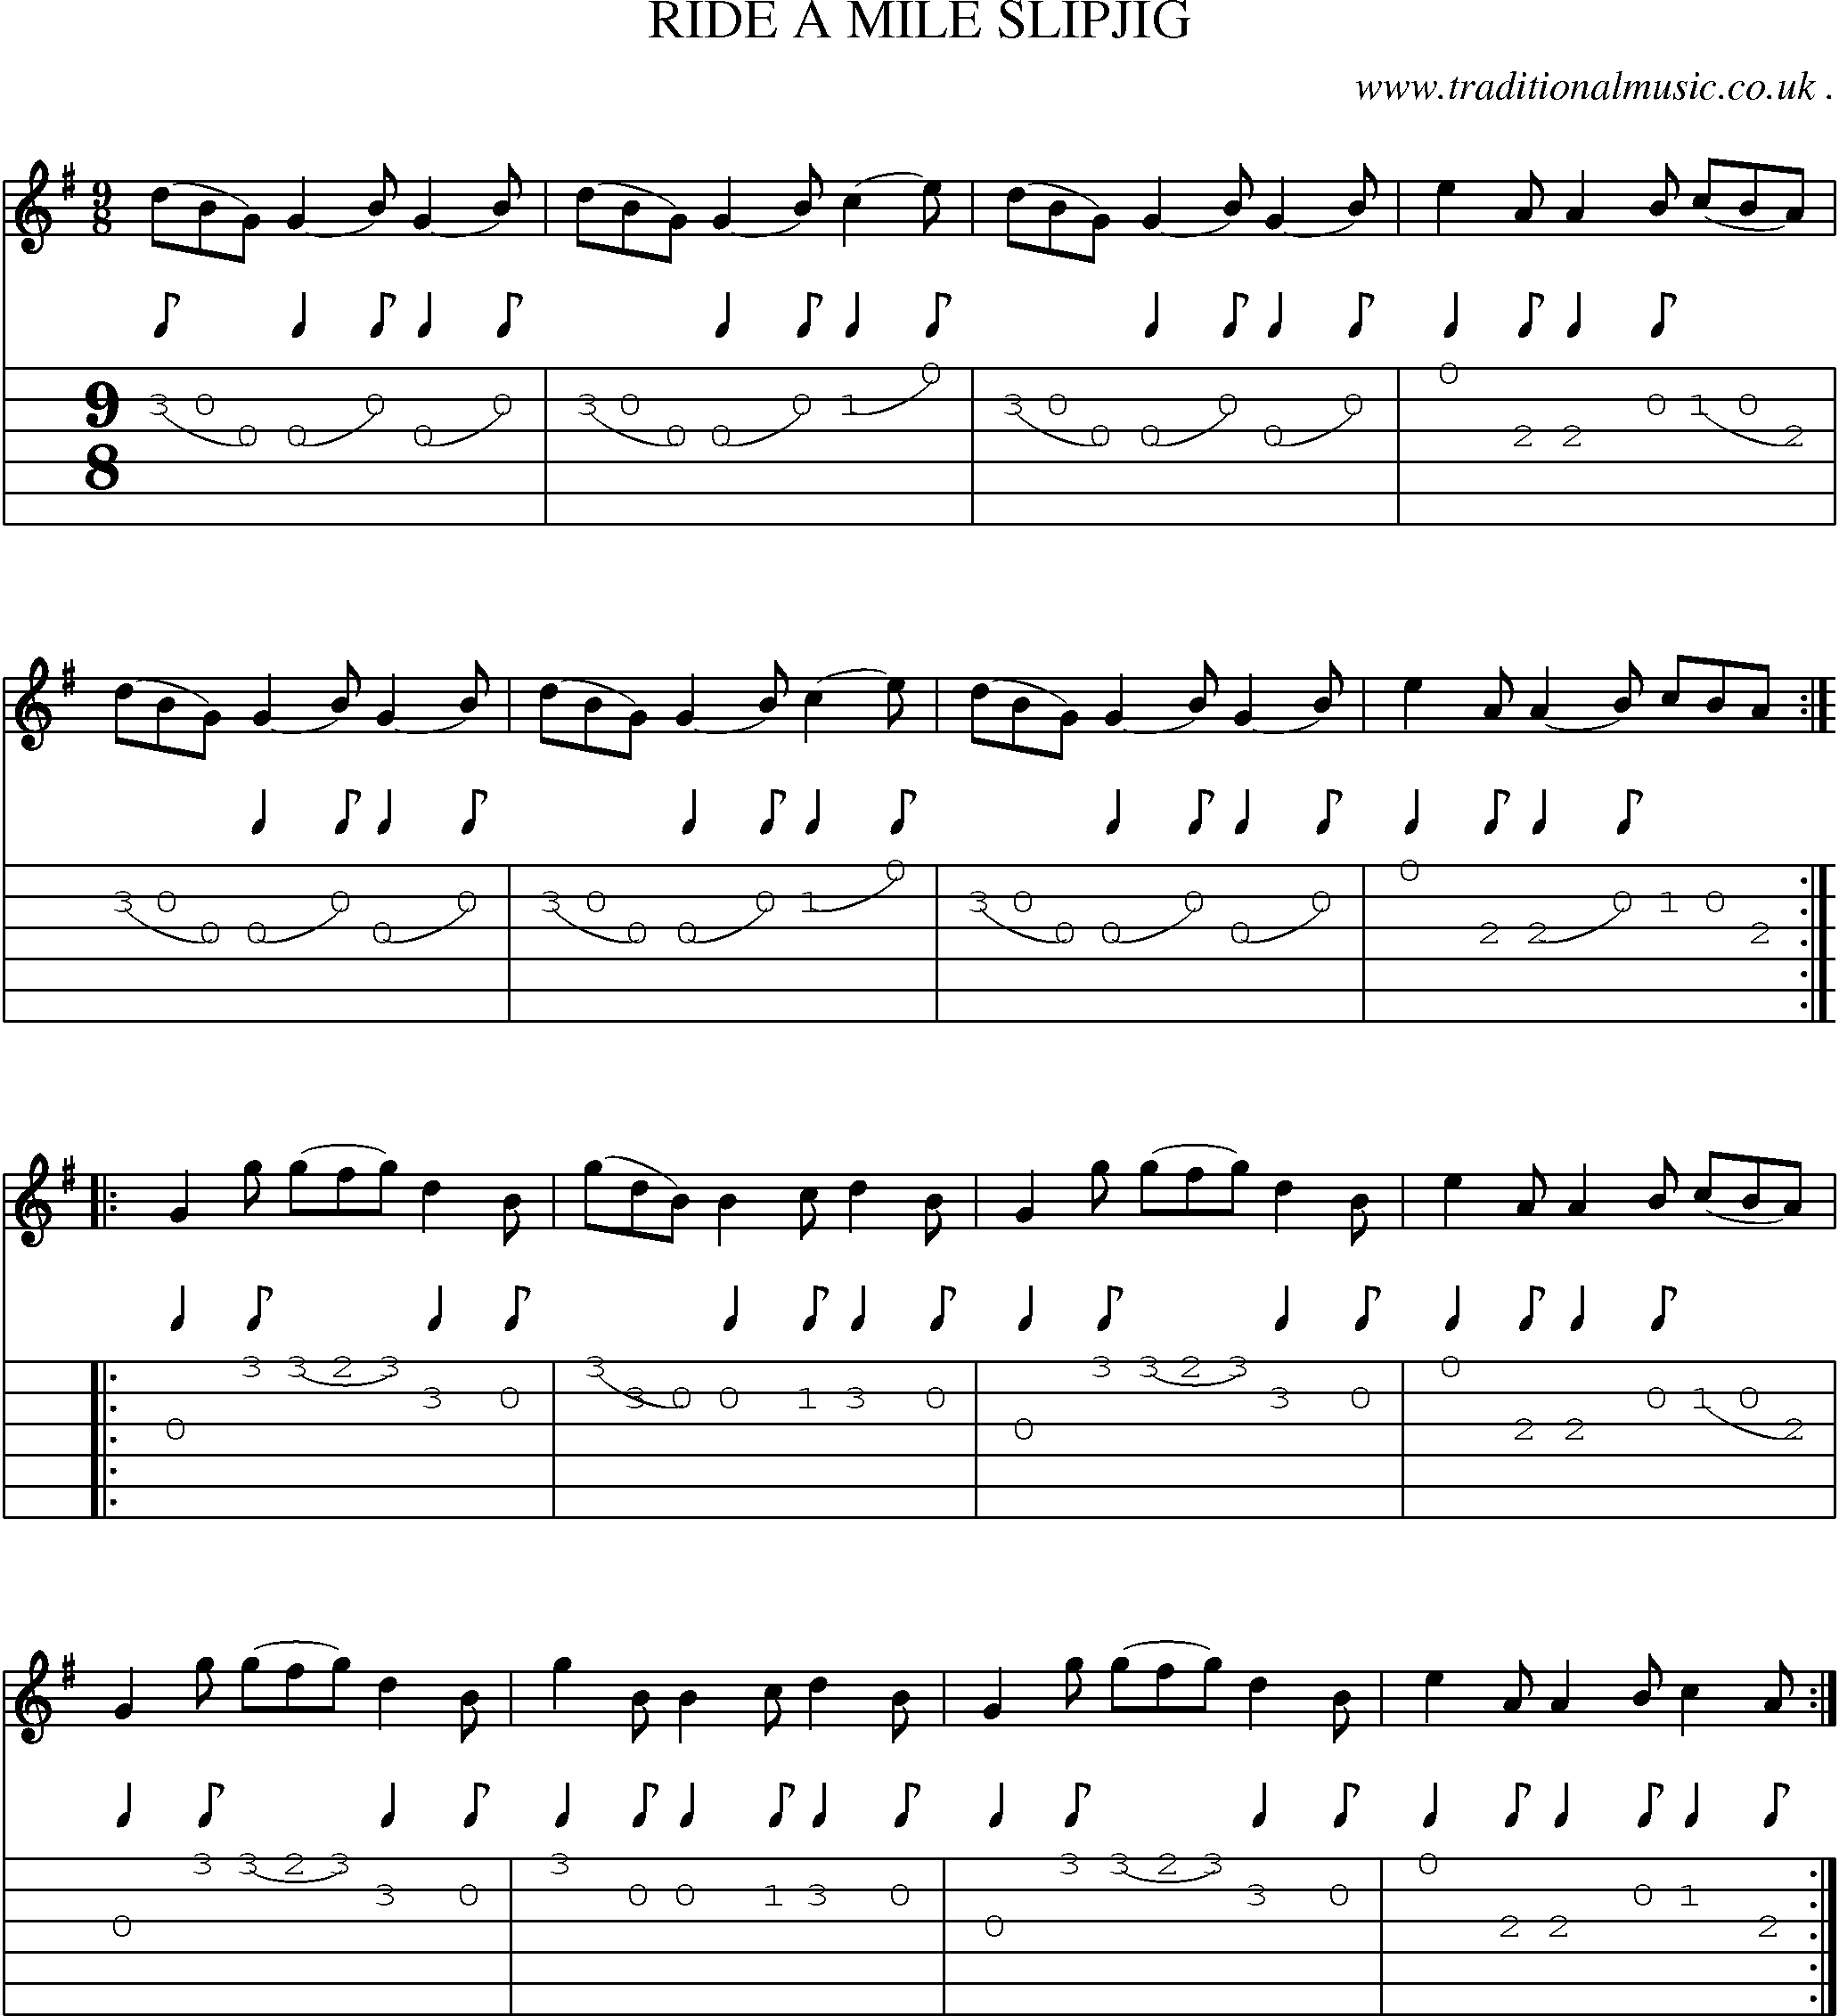 Sheet-Music and Guitar Tabs for Ride A Mile Slipjig